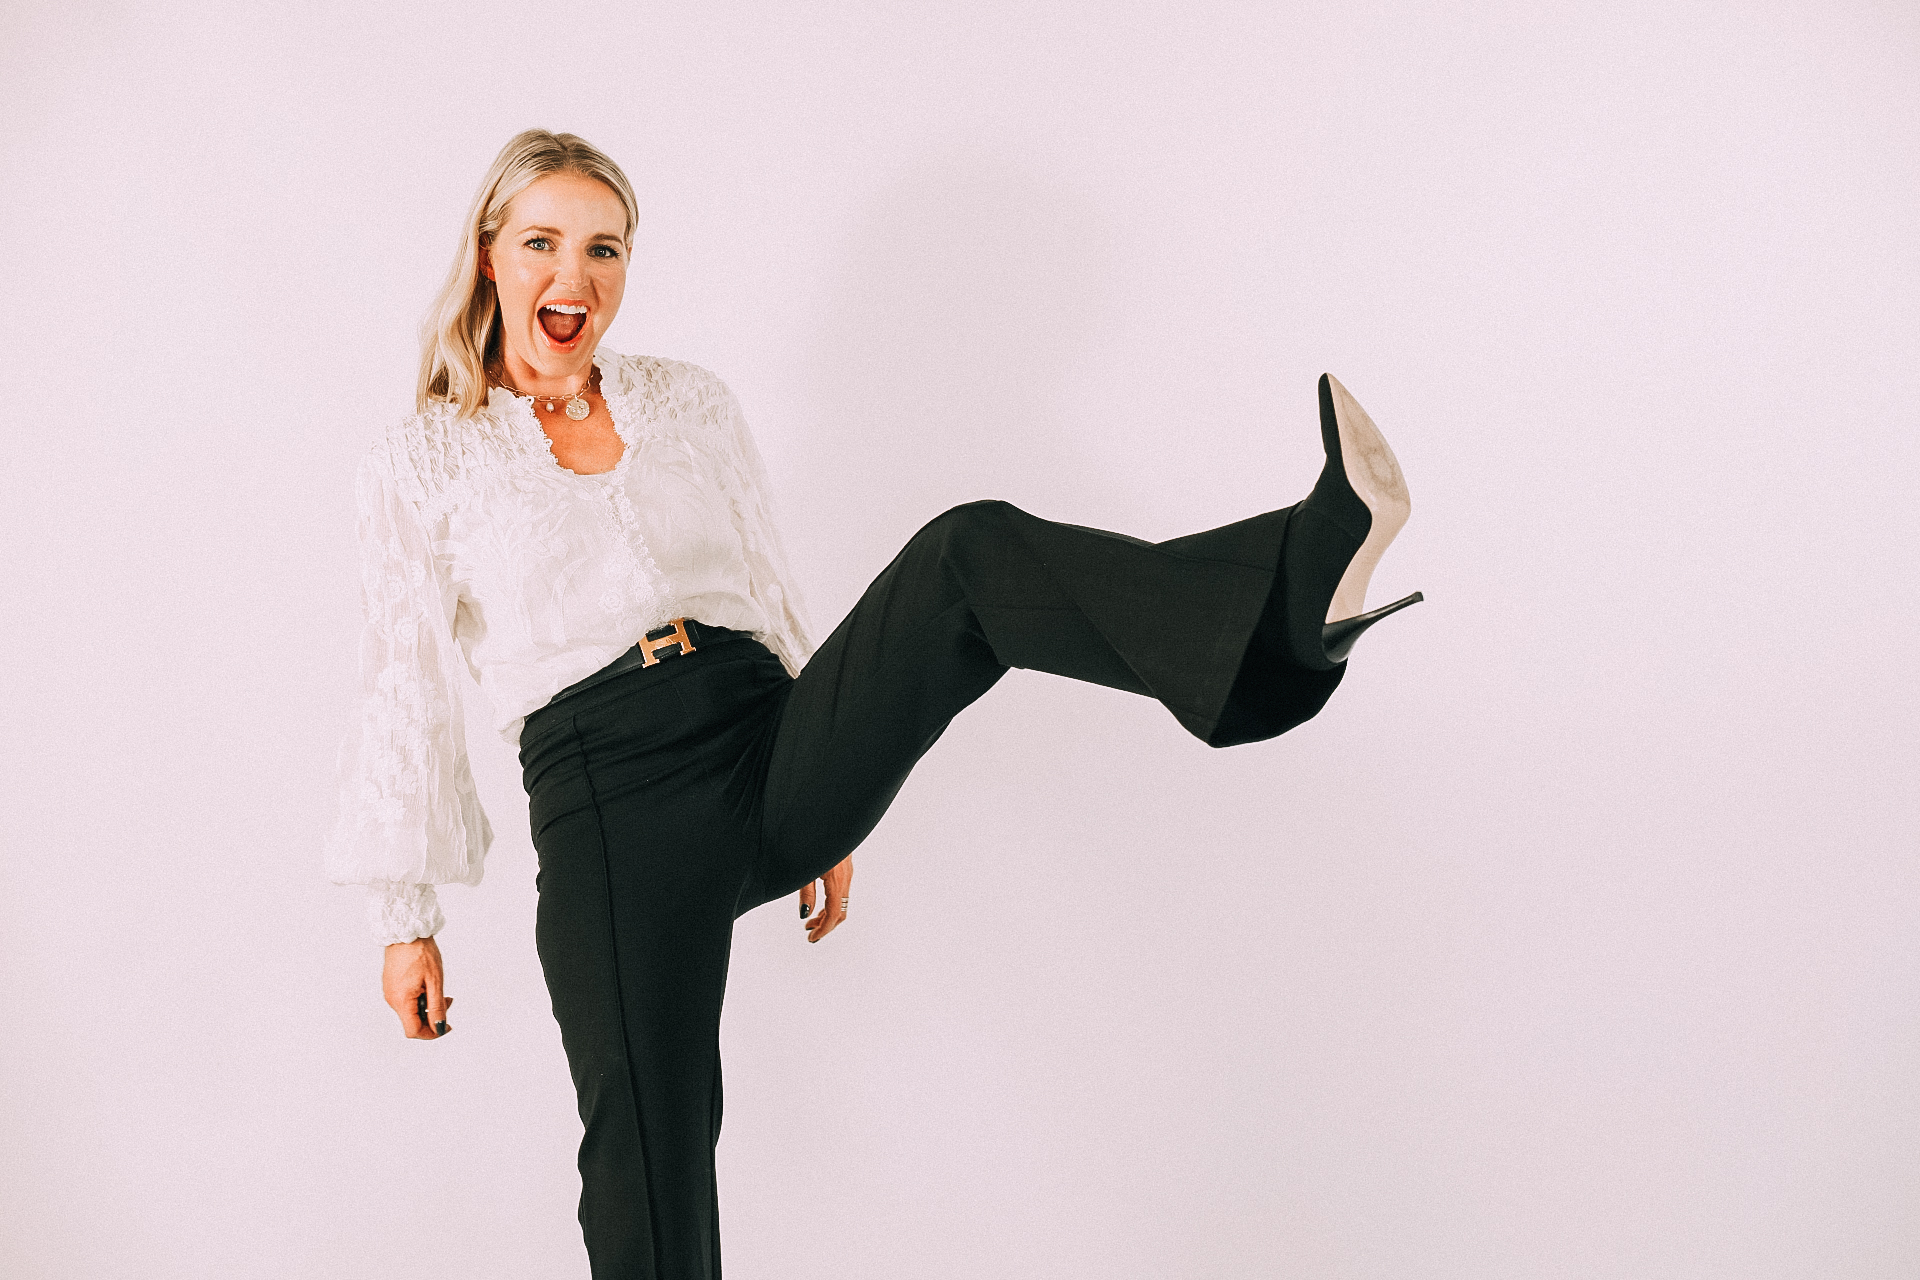 slimming pants by Spanx on fashion blogger Erin Busbee of Busbee Style